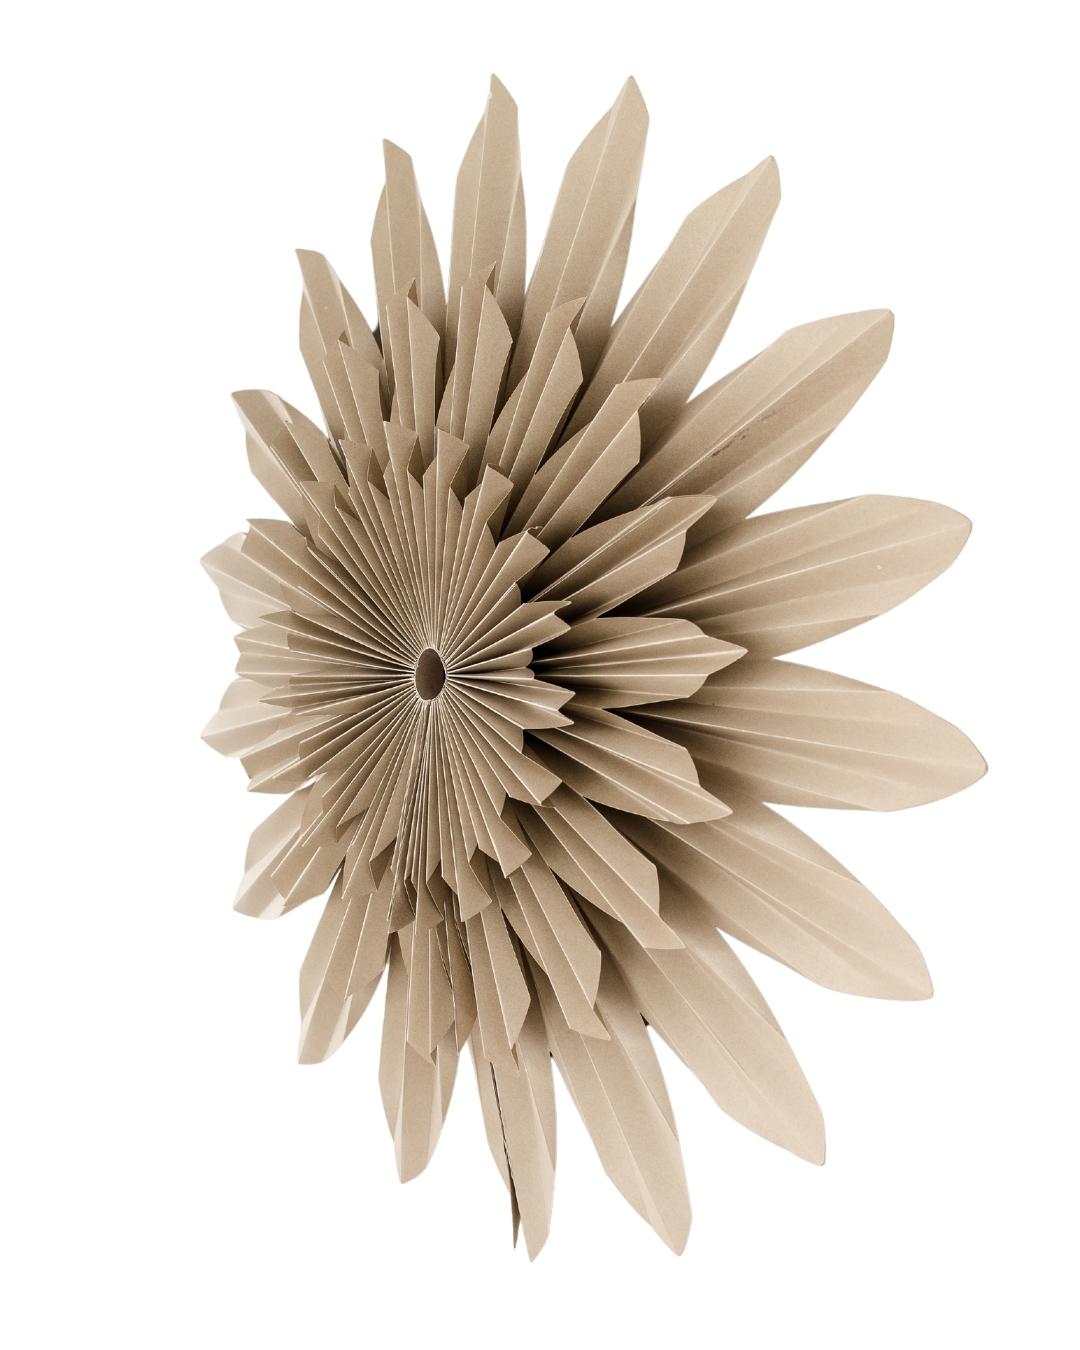 65cm almond latte coloured paper flower wall hanging on a white background viewed from a side angle